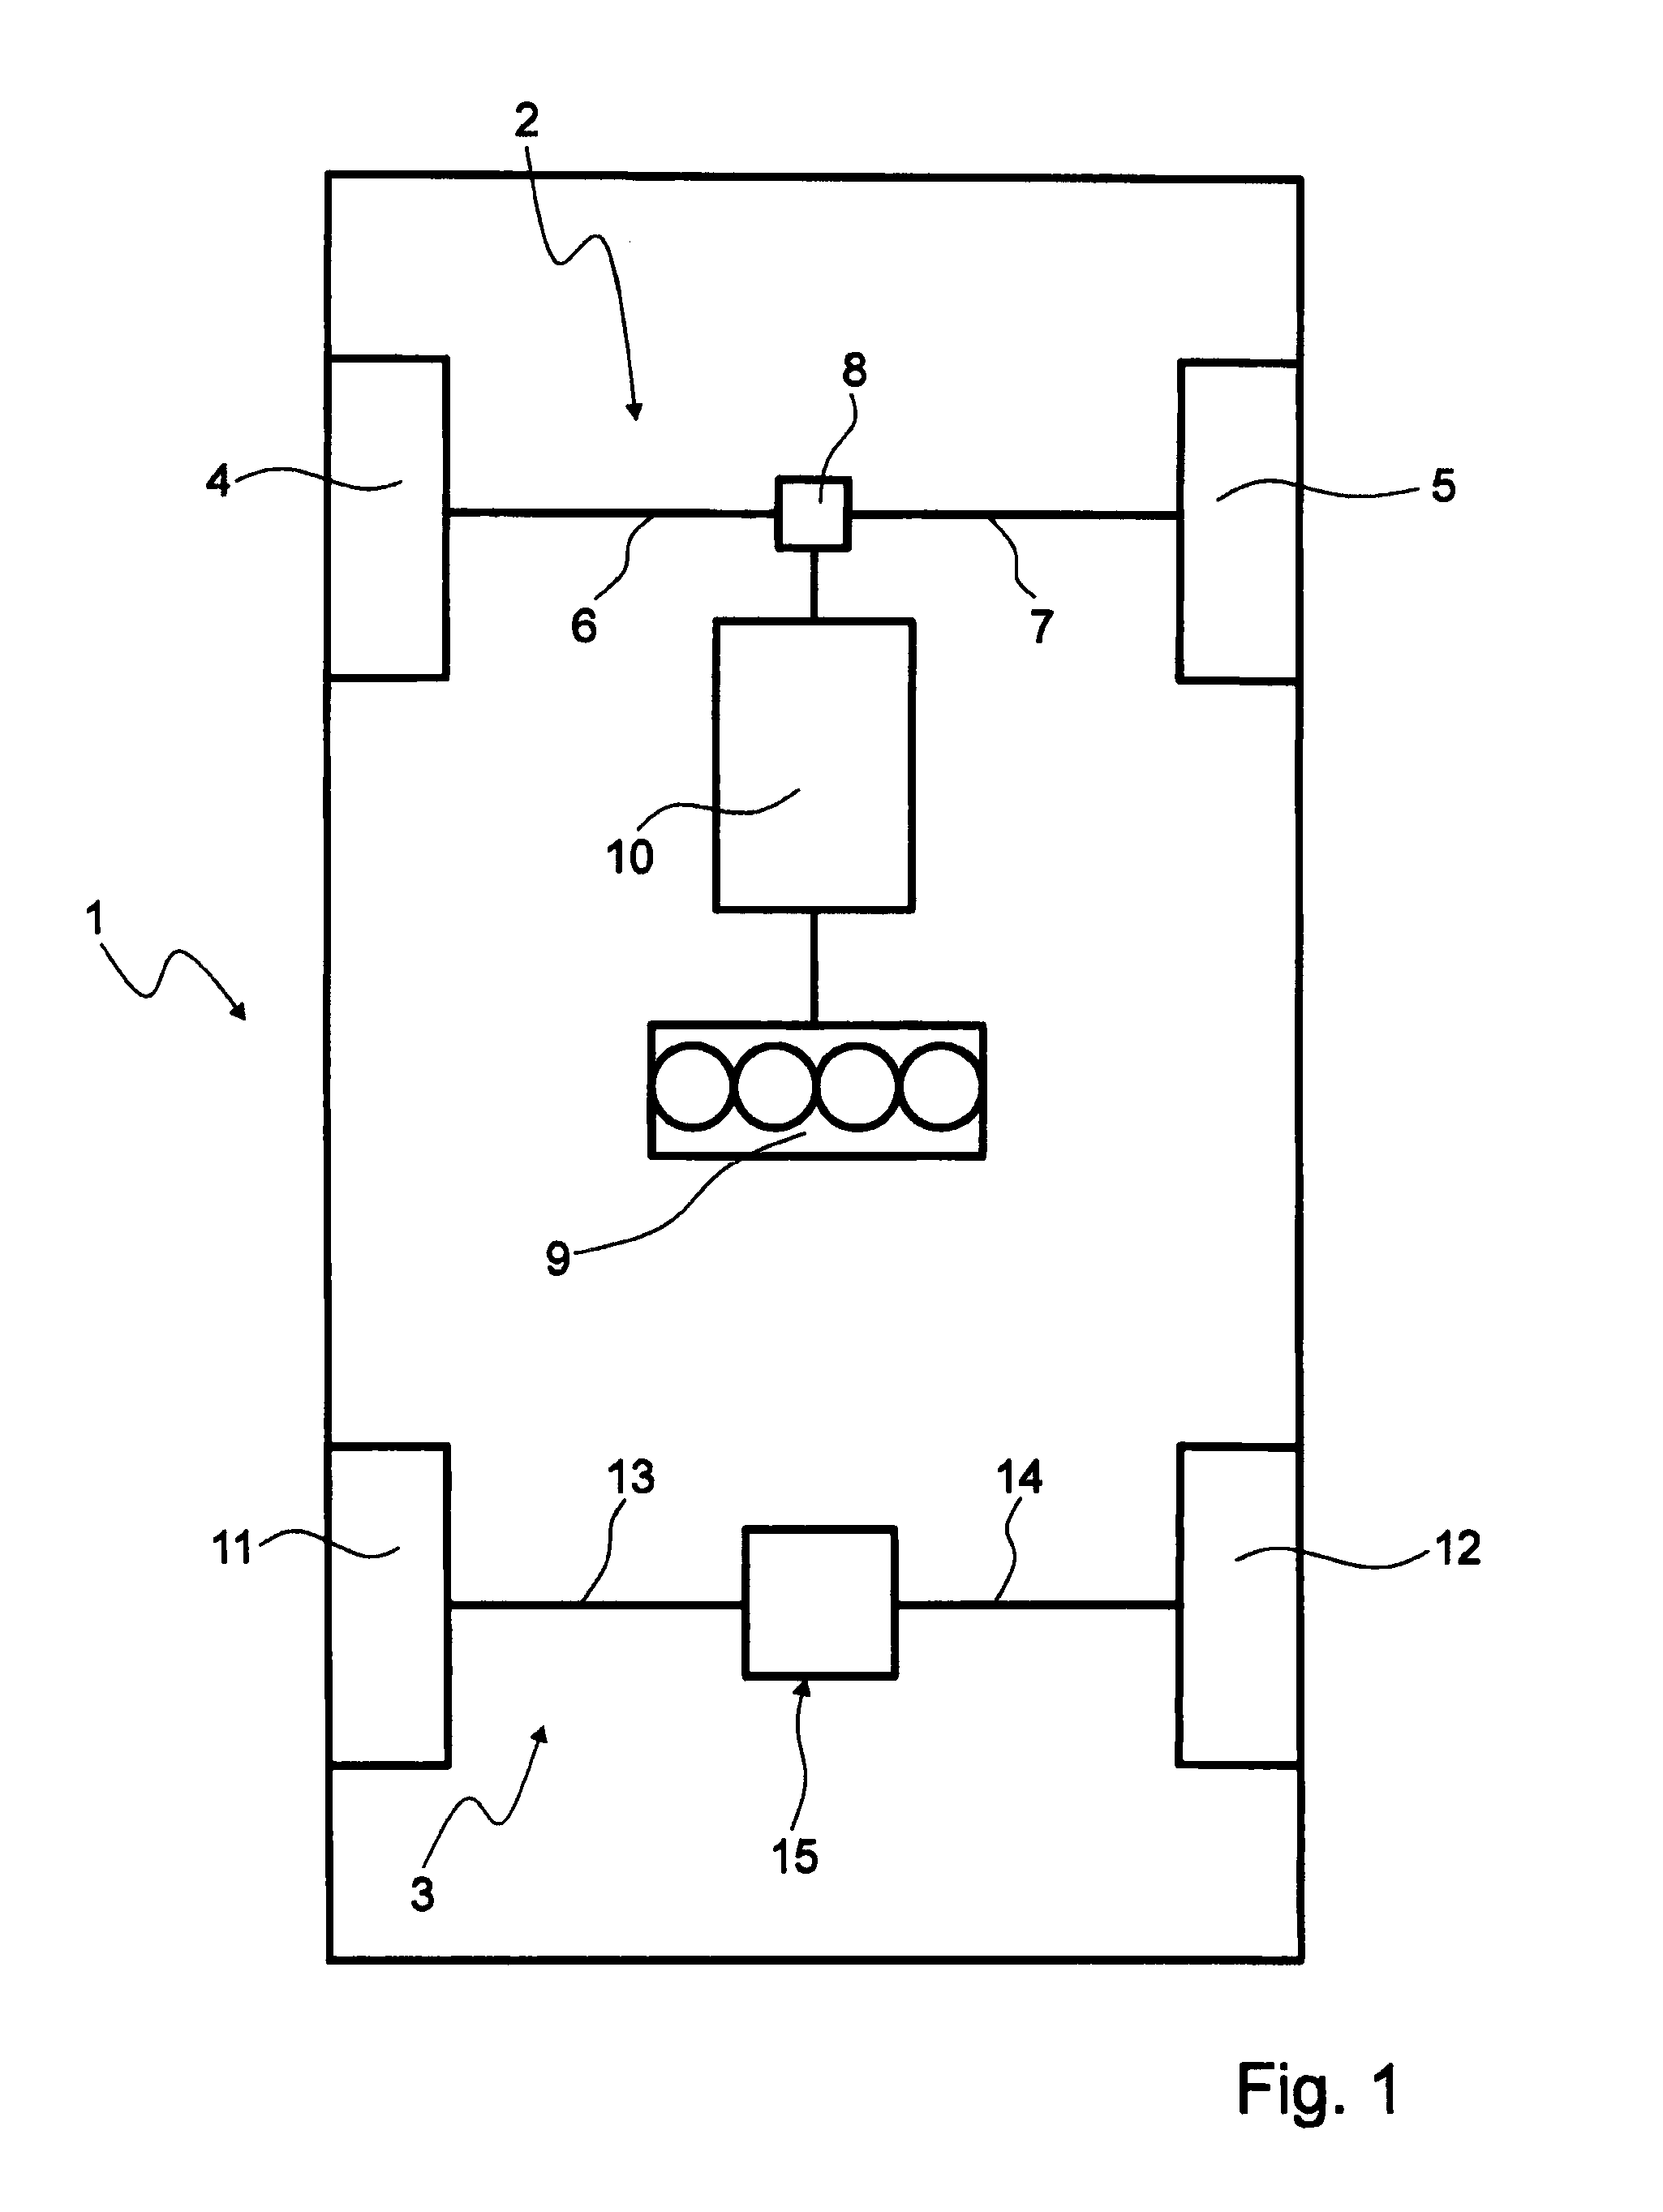 Transmission device comprising at least two output shafts